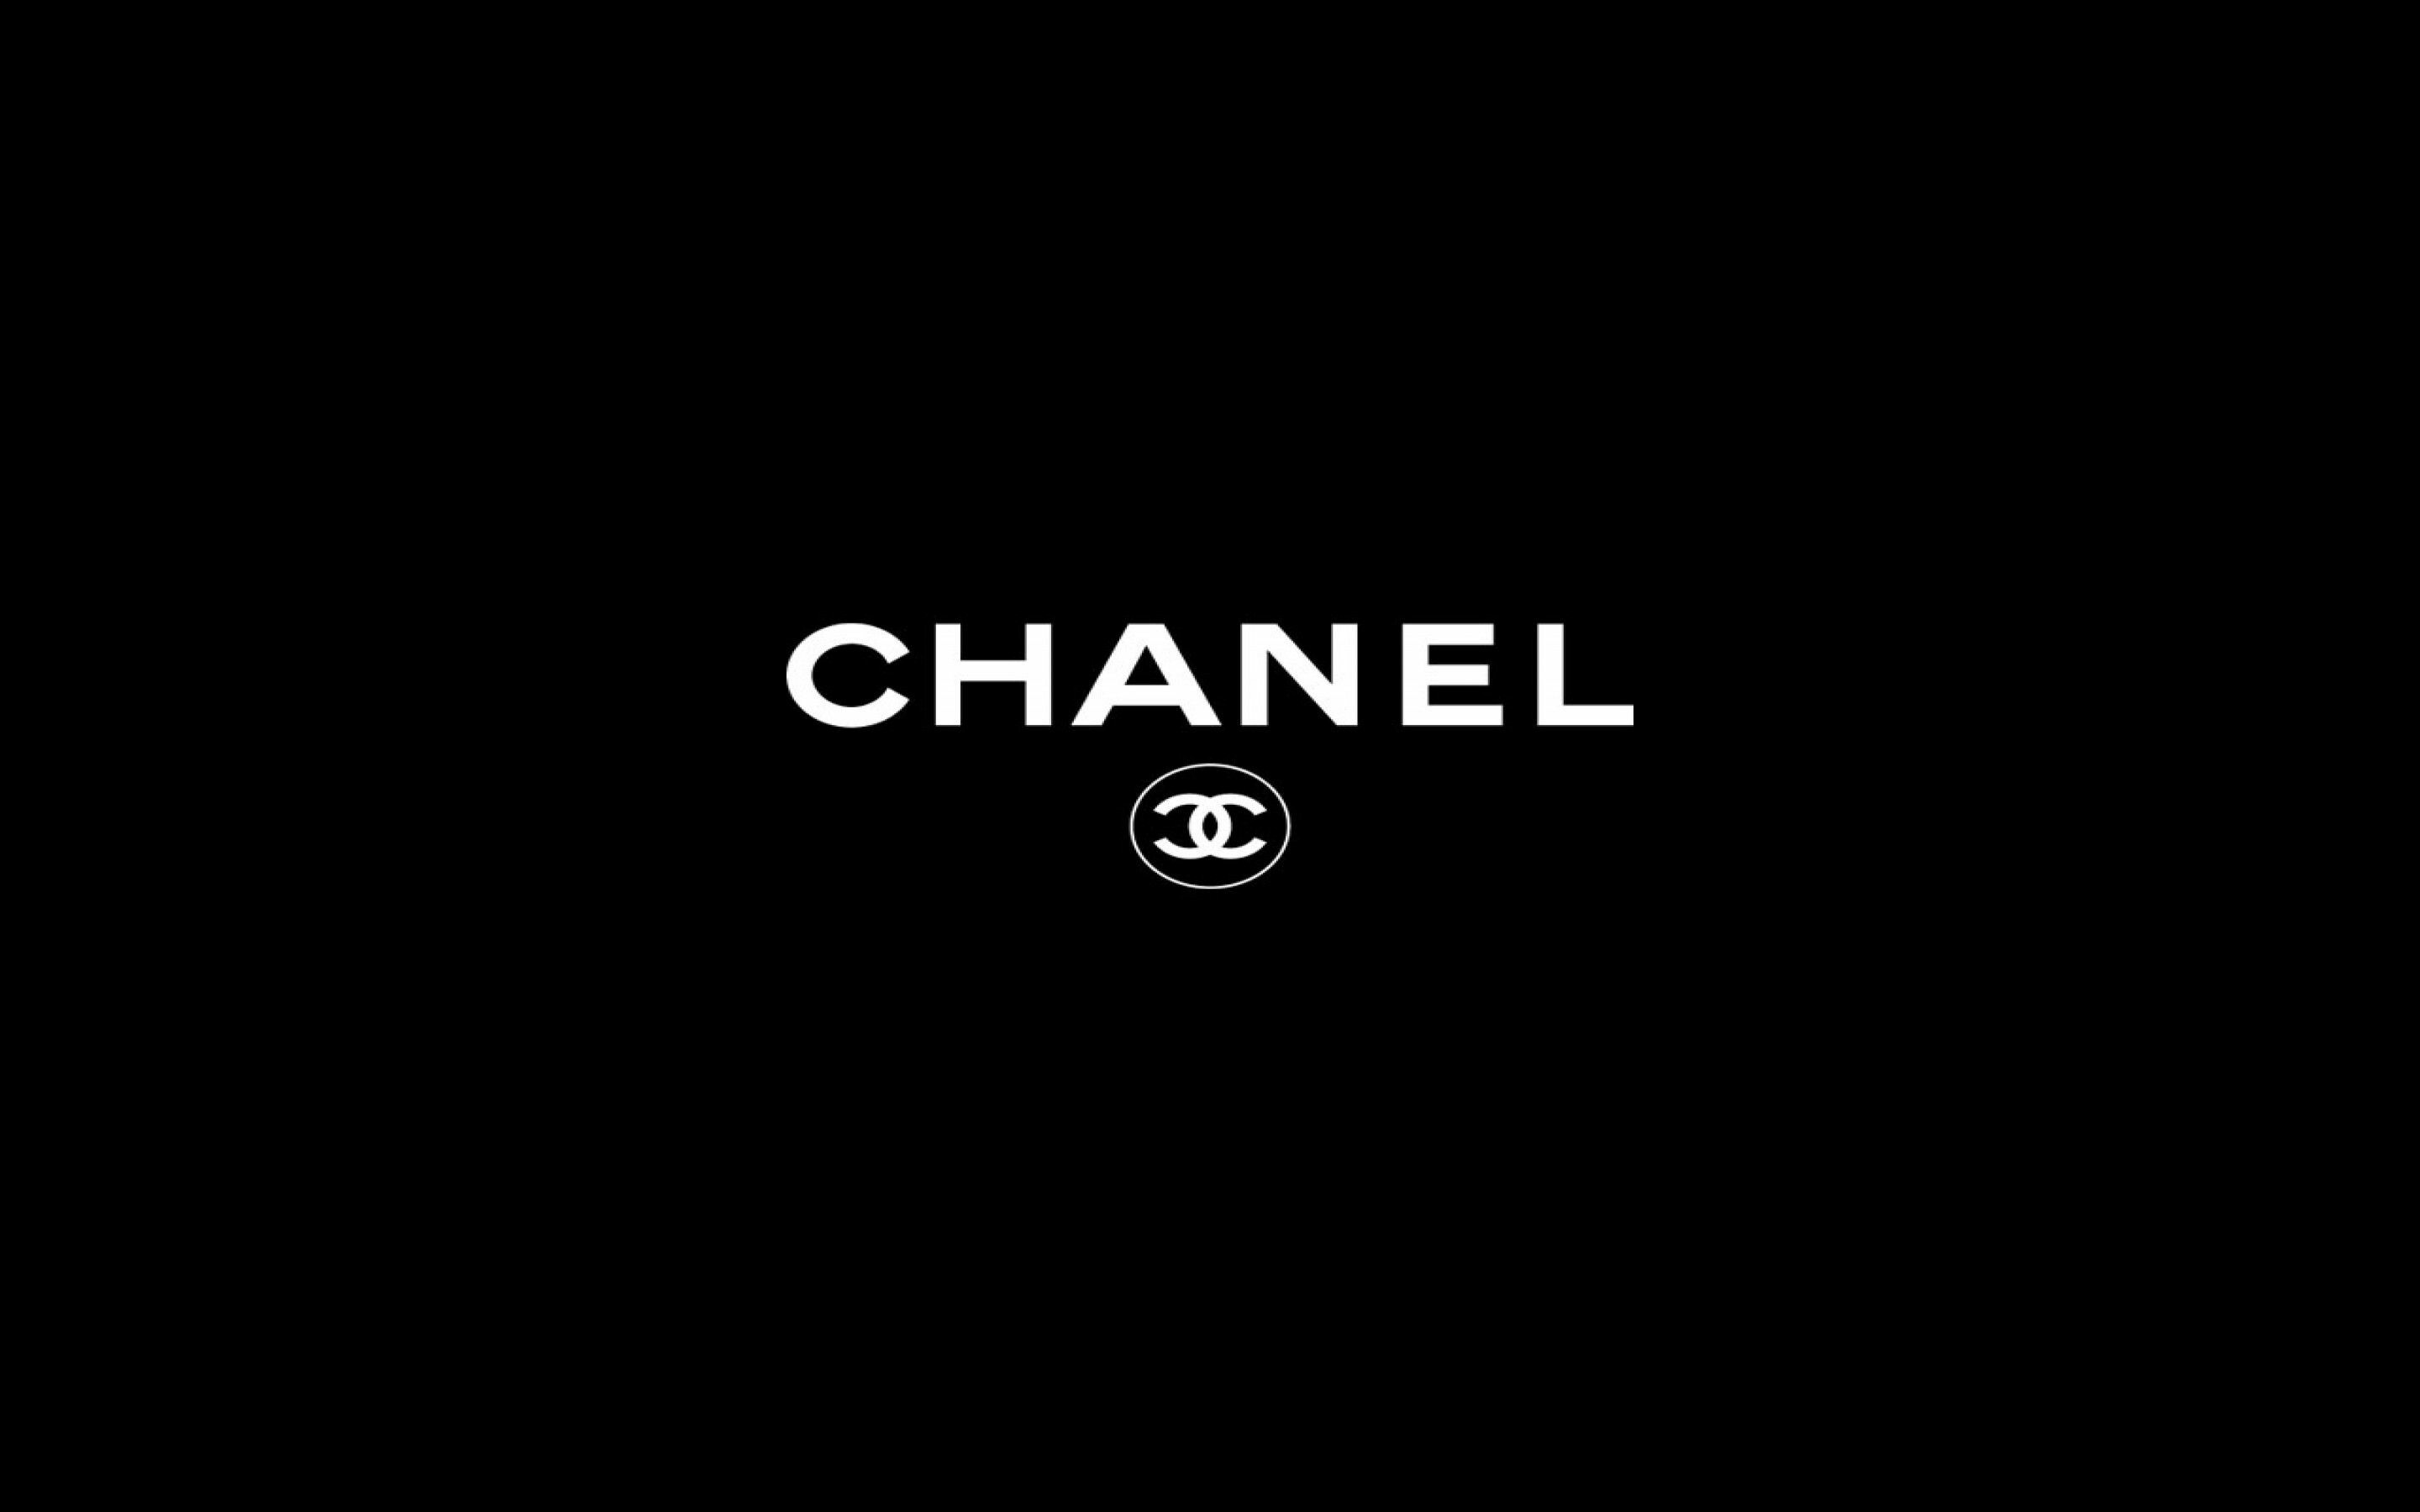 Chanel: Specializes in women's ready-to-wear, luxury goods, and accessories. 2880x1800 HD Wallpaper.